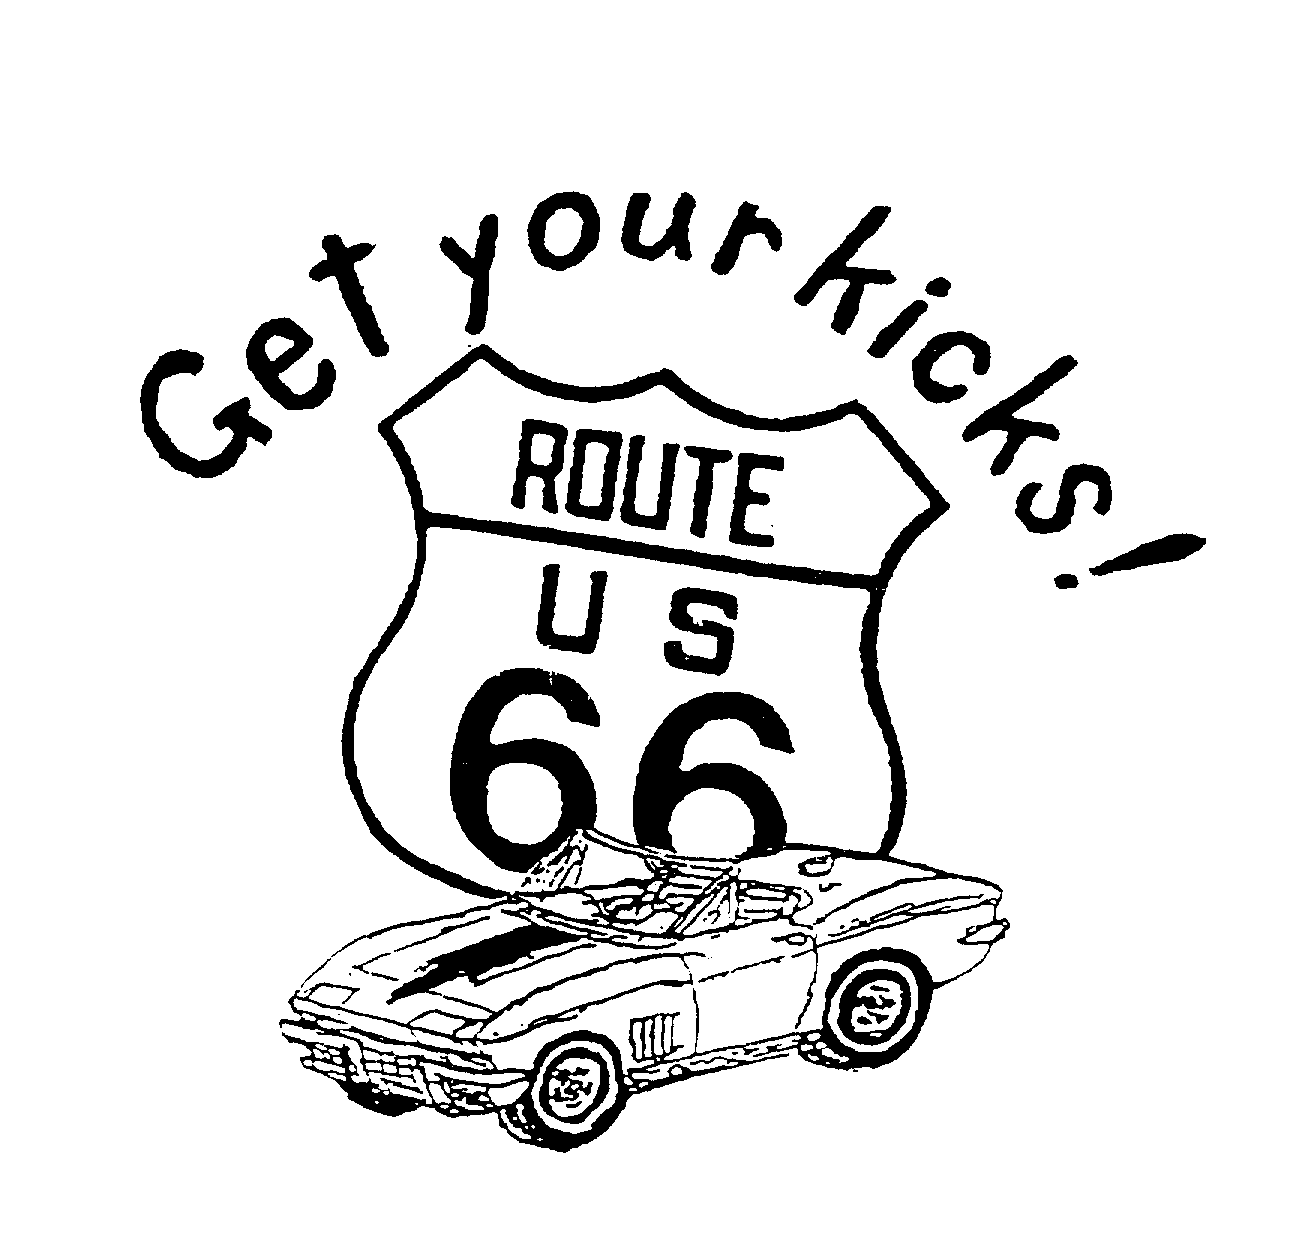  GET YOUR KICKS! ROUTE US 66